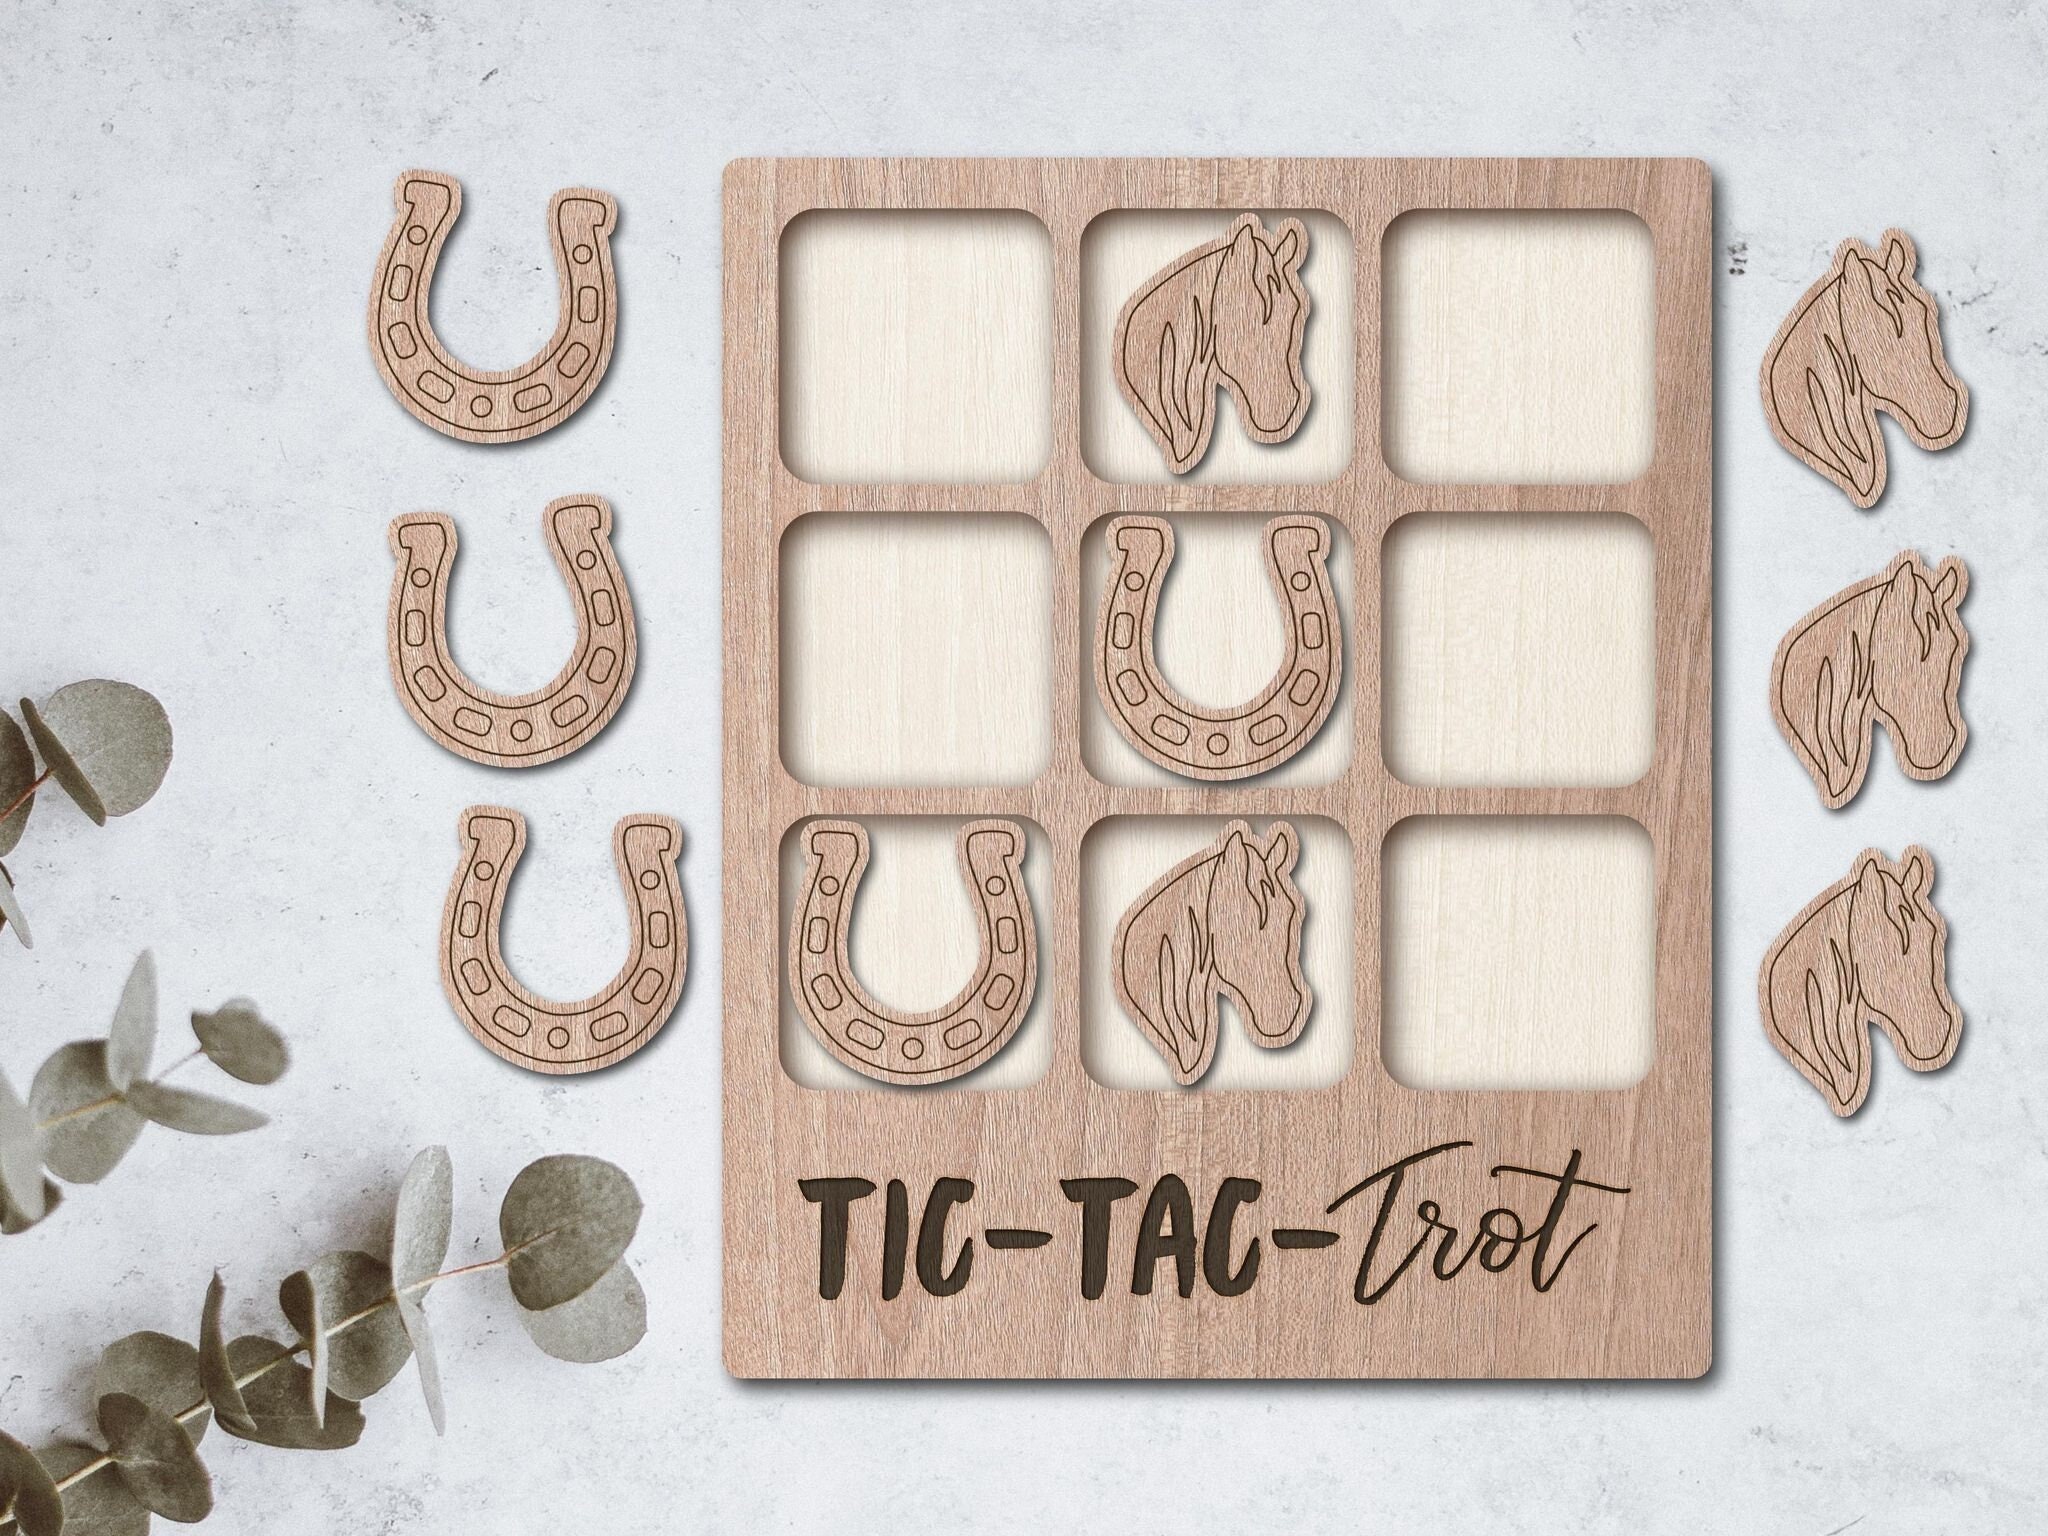 Horse horseshoe laser File Tic Tac Toe table game - INSTANT DOWNLOAD - svg dxf Ai - glowforge k40 thunder - wooden games - laser cutter